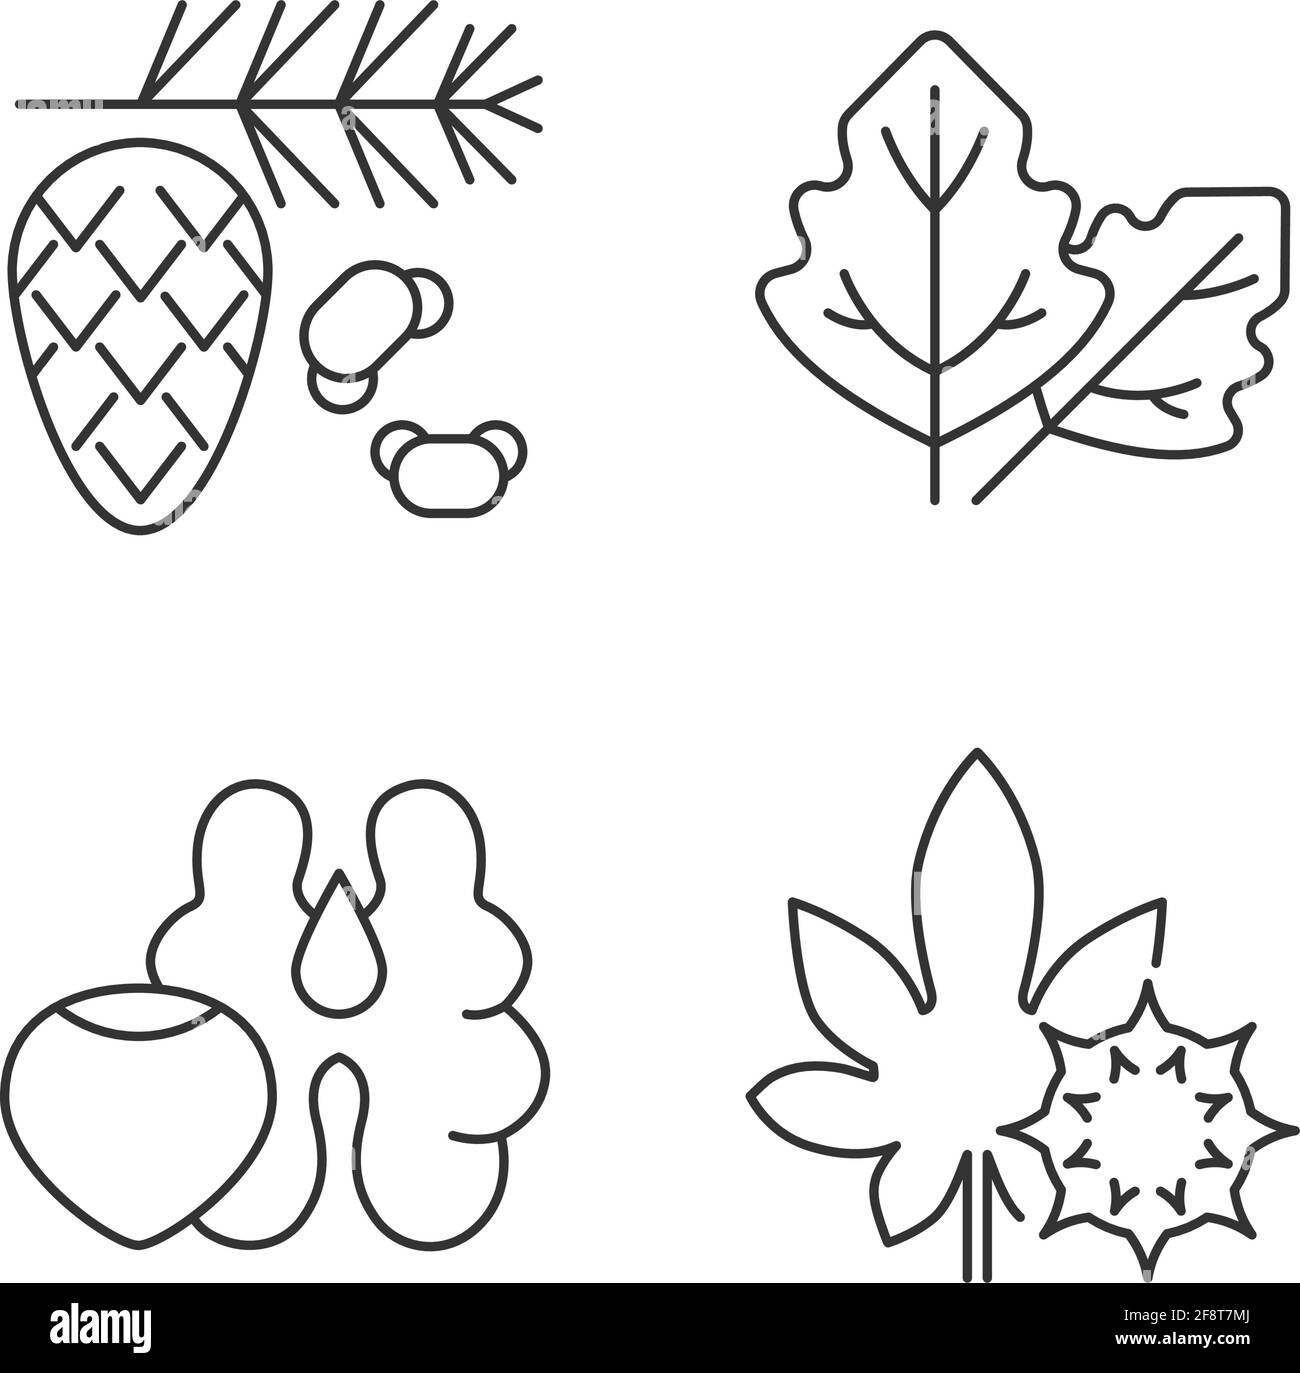 Cause of allergic reaction linear icons set Stock Vector